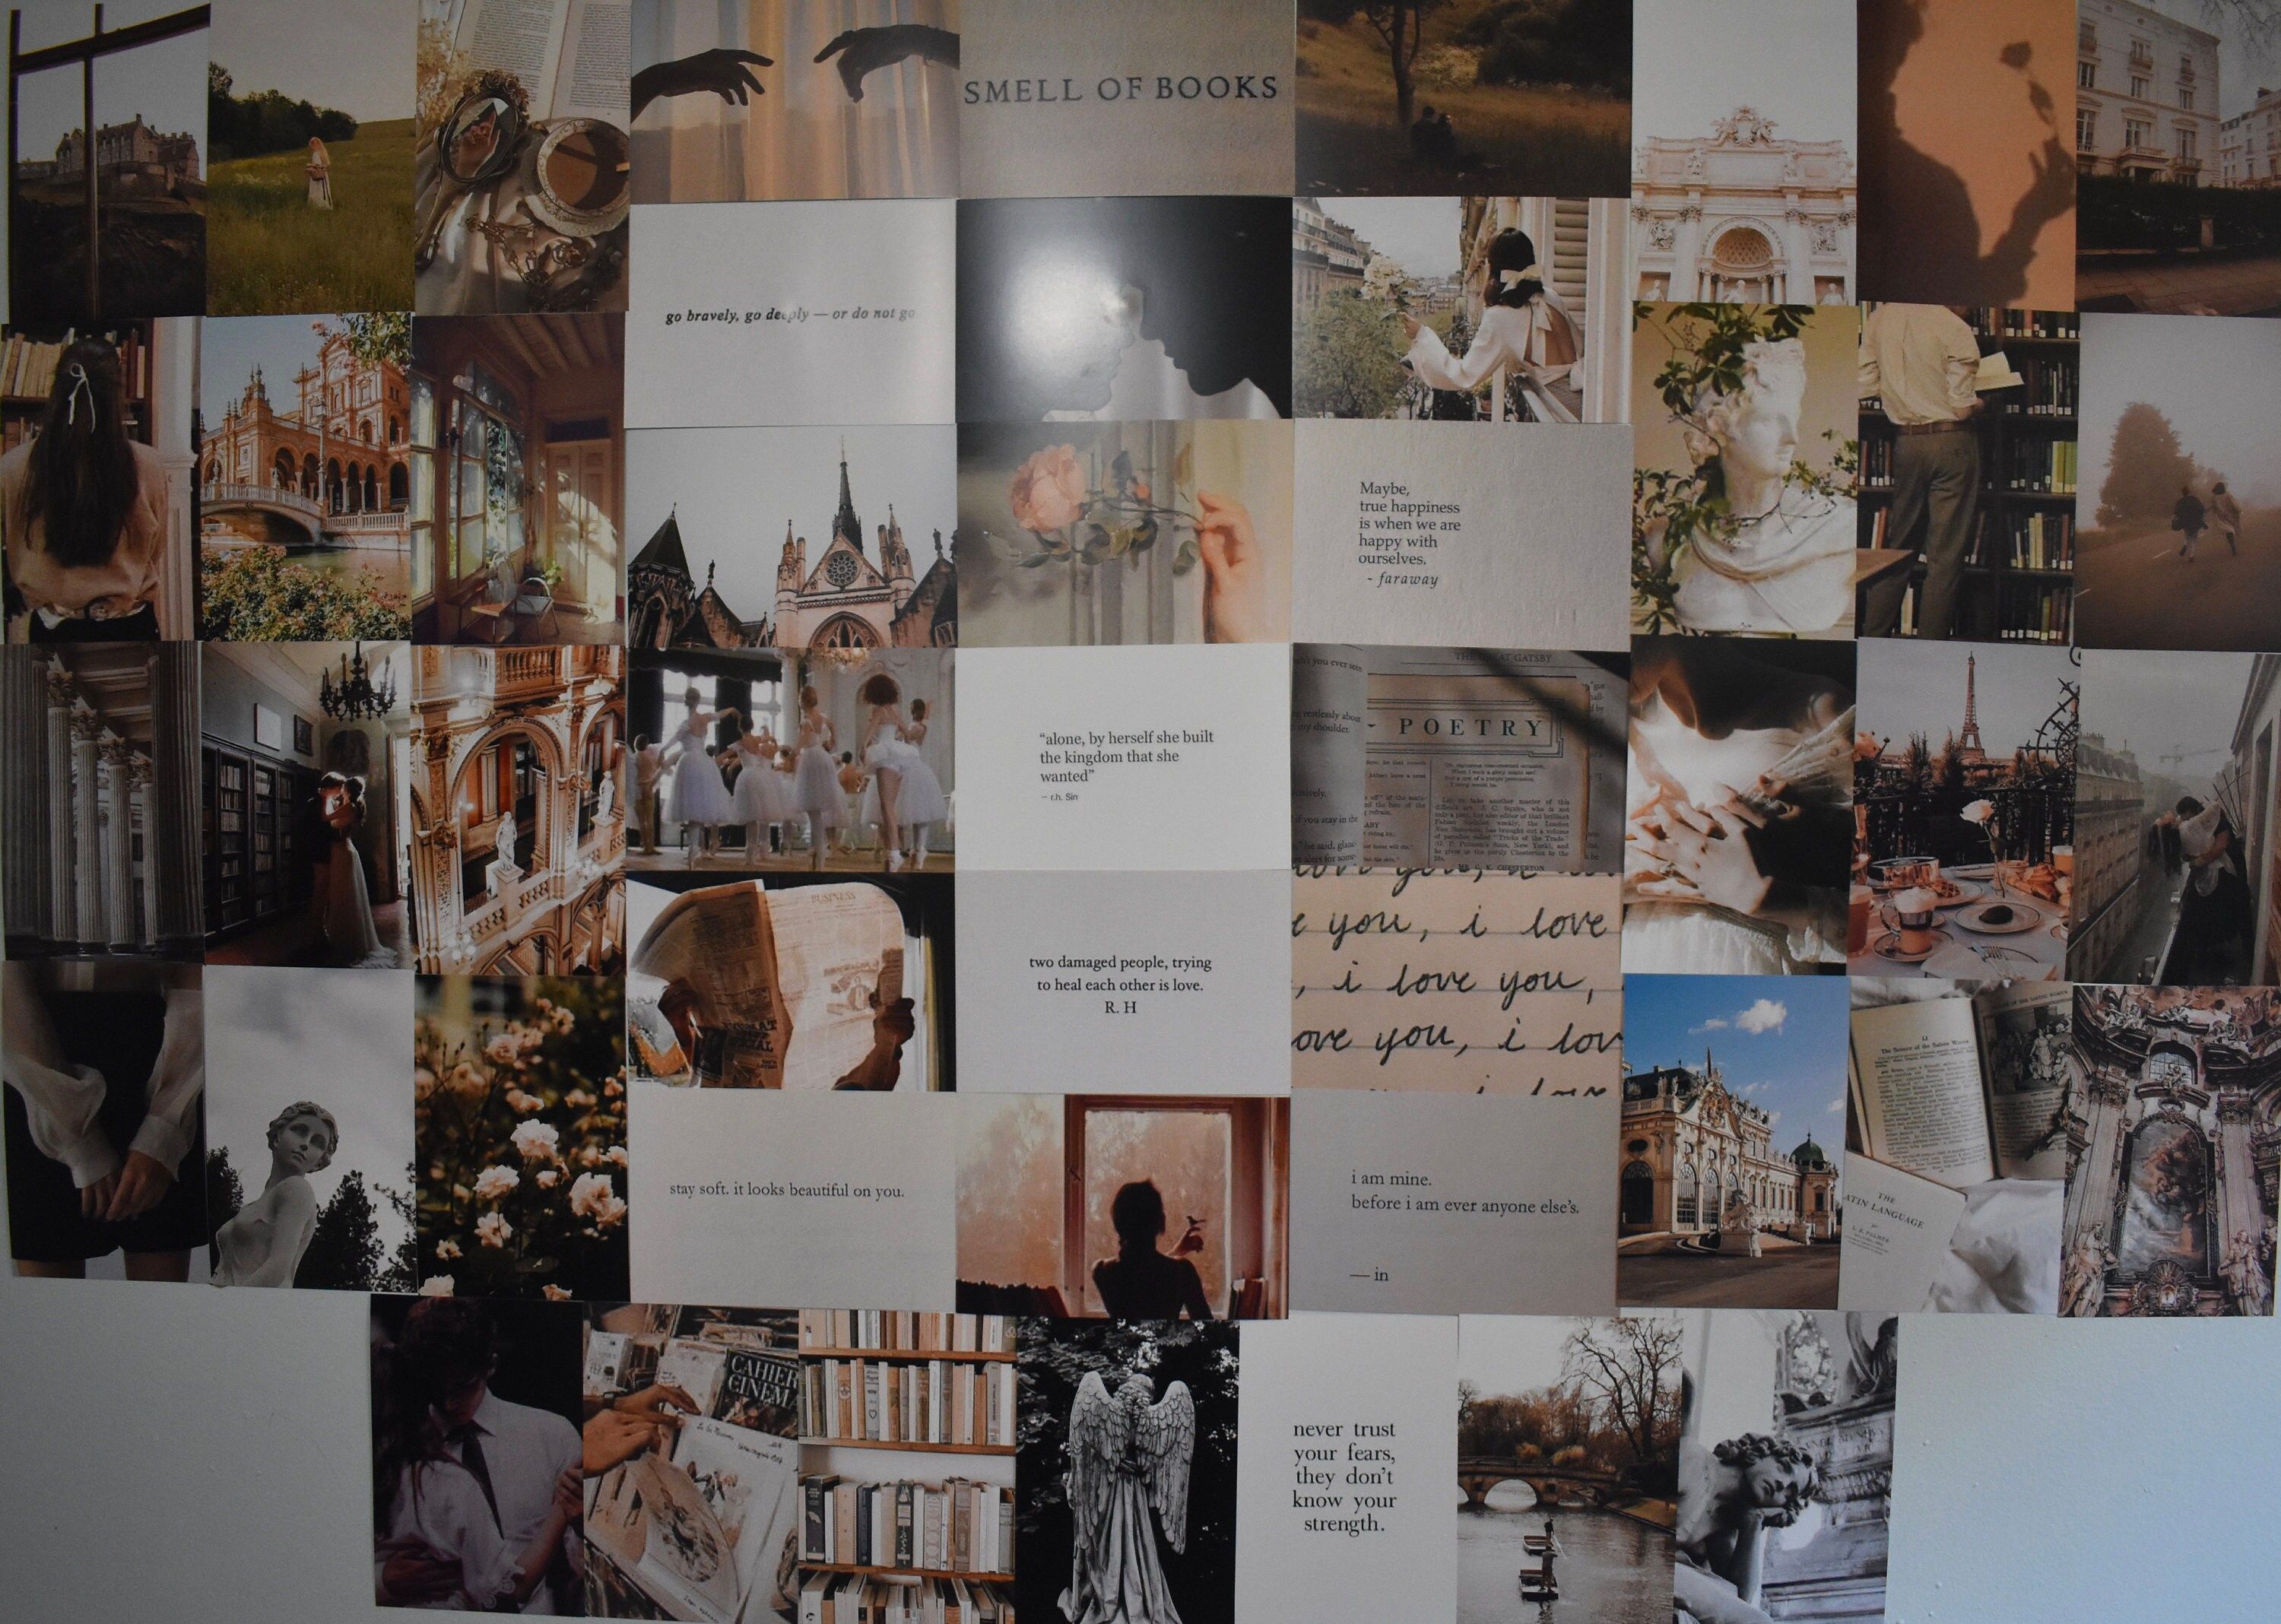 Collage of black and white photos, quotes, and images of books on a wall. - Light academia